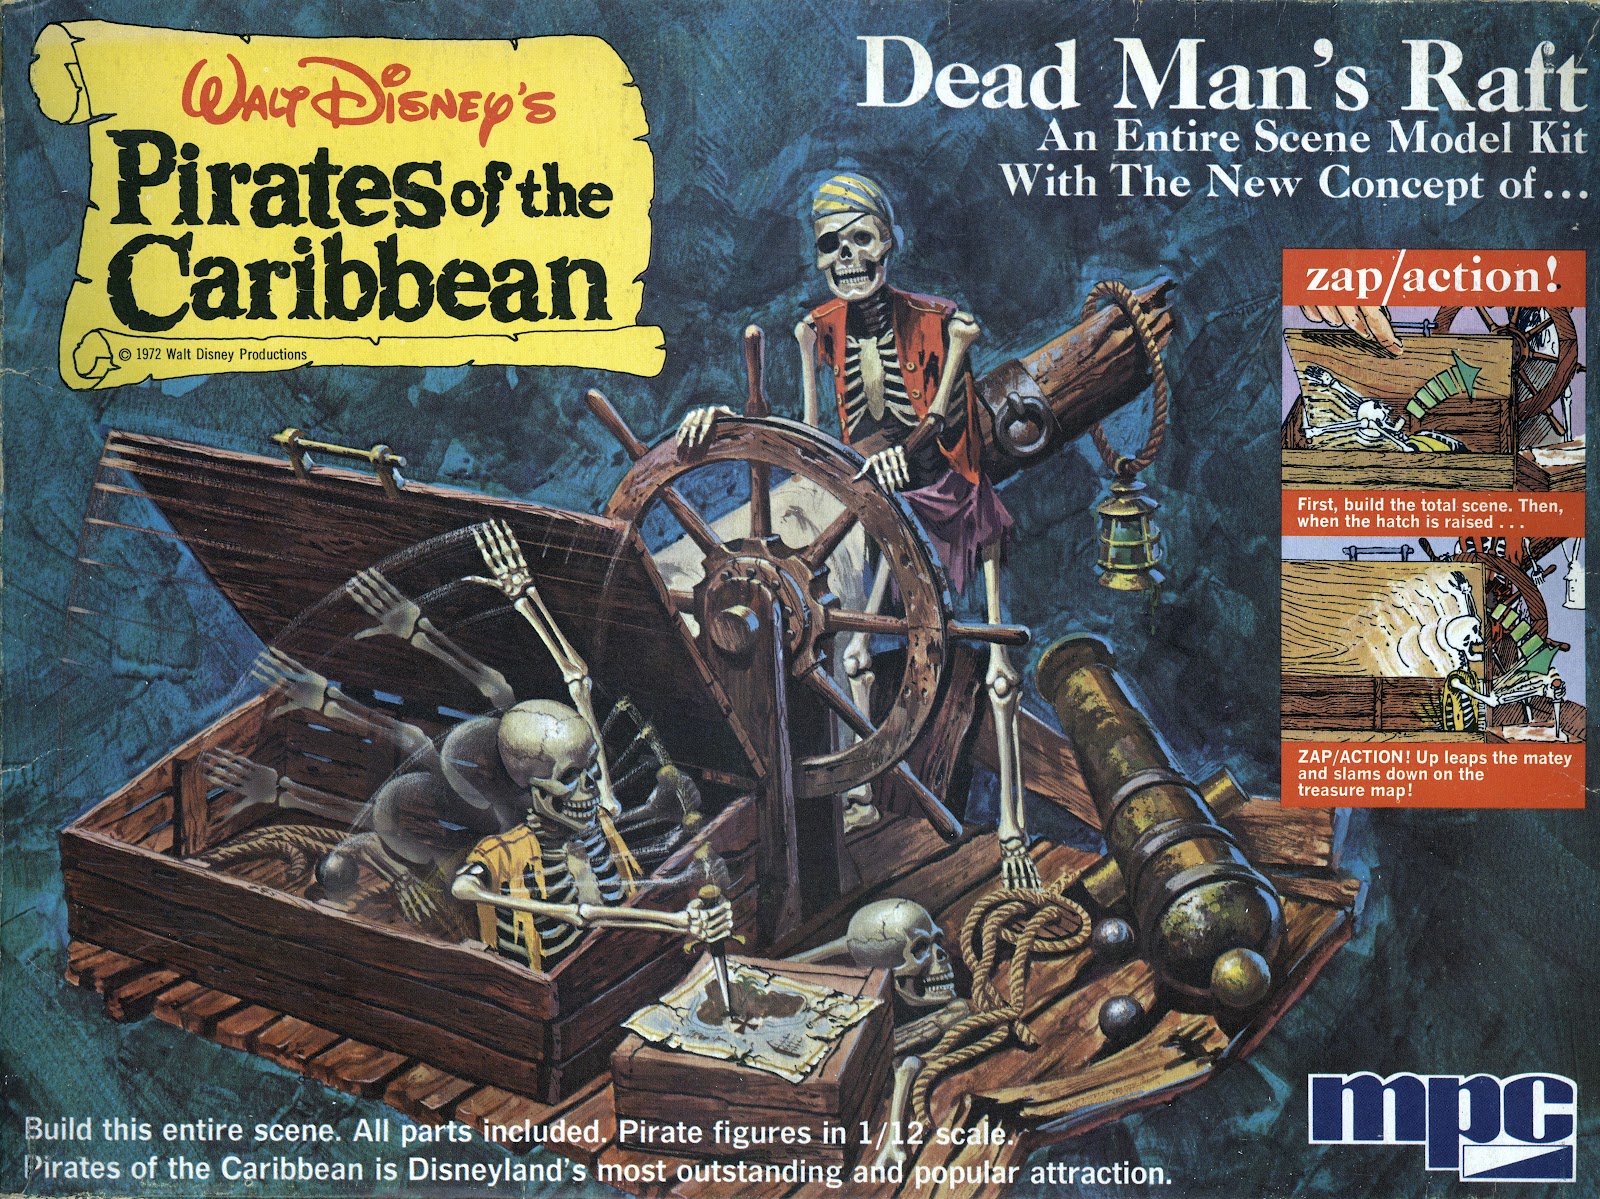 1973 VINTAGE COMIC 2PG PRINT AD FOR MPC DISNEY PIRATES OF THE CARIBBEAN MODELS 